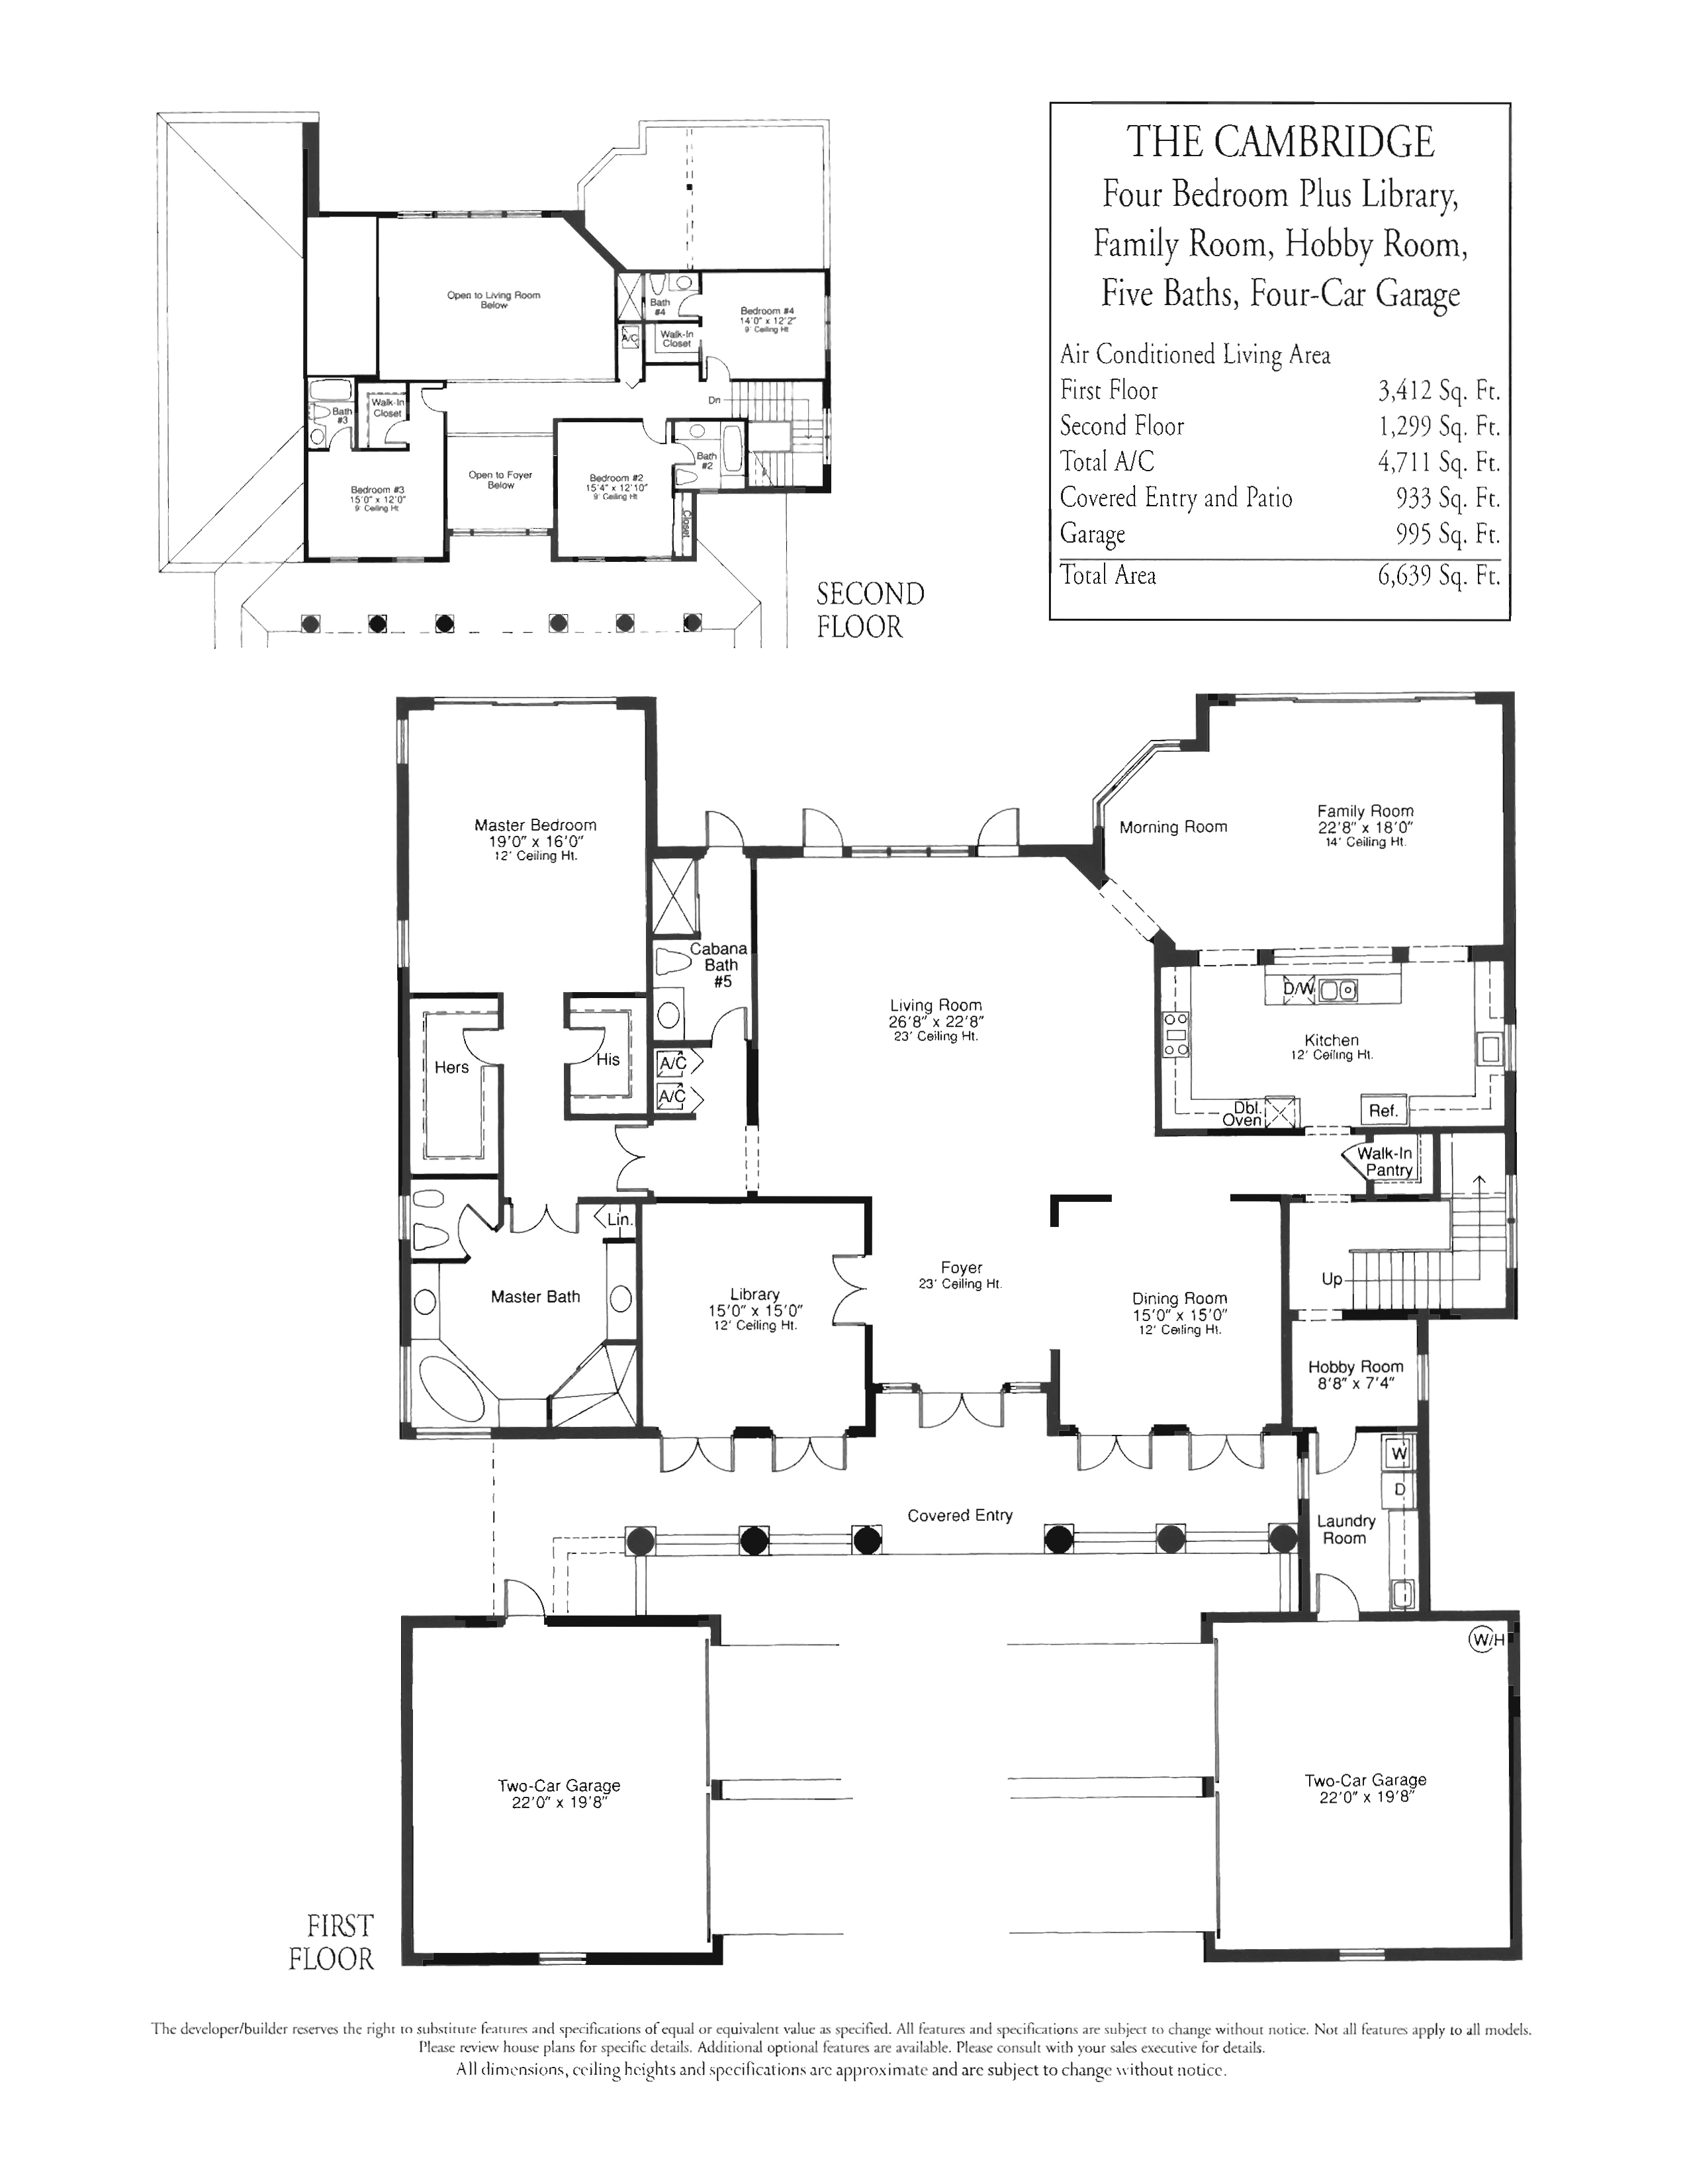 3 car garage pics 4 car garage house plans plans for small houses index wiki 0